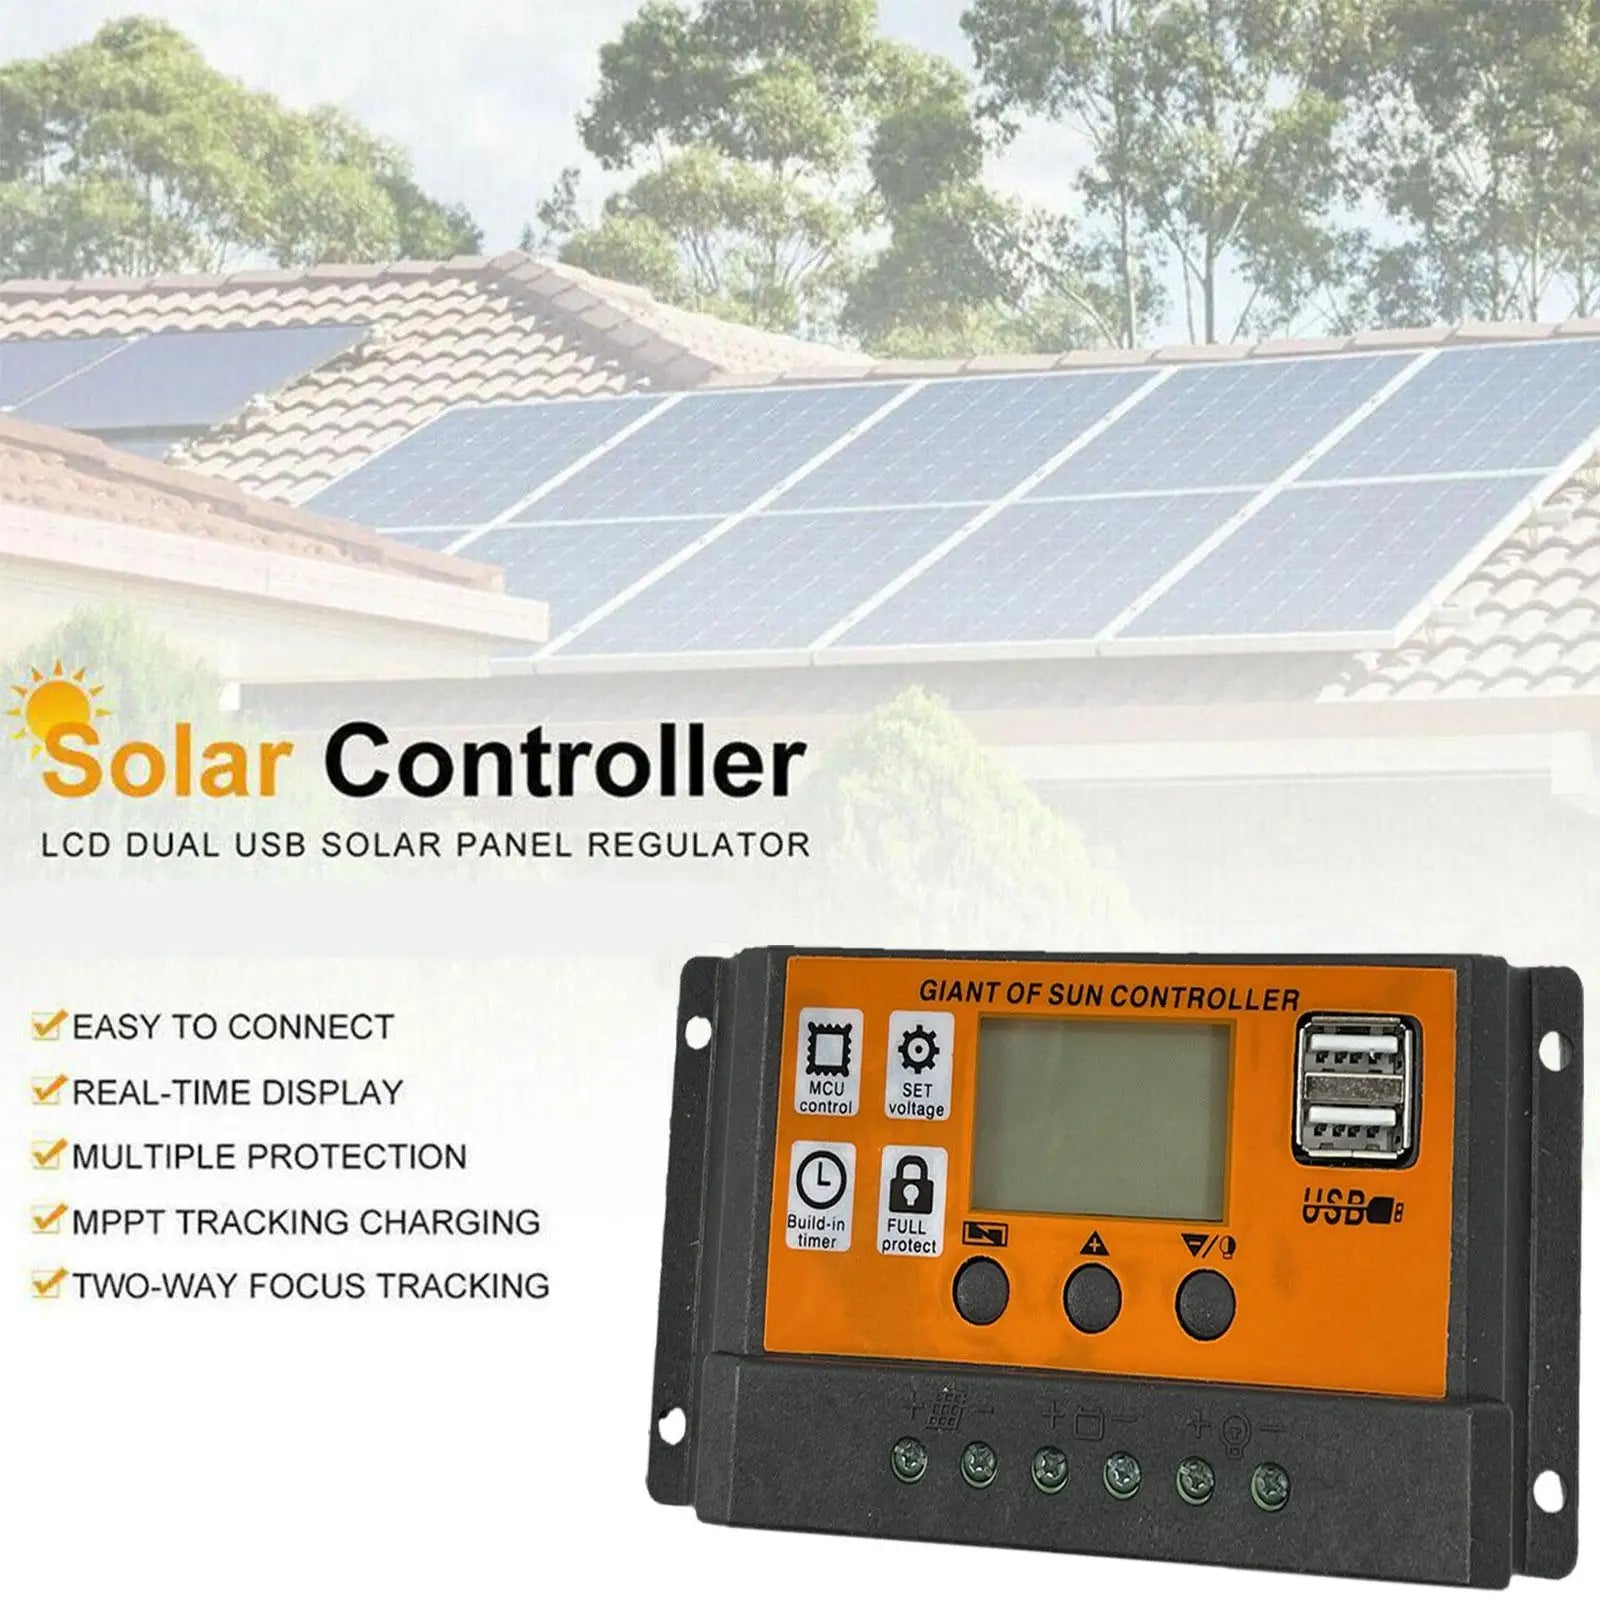 MPPT Solar Charge Controller, Advanced solar charge controller with LCD display and dual USB ports for efficient renewable energy management.